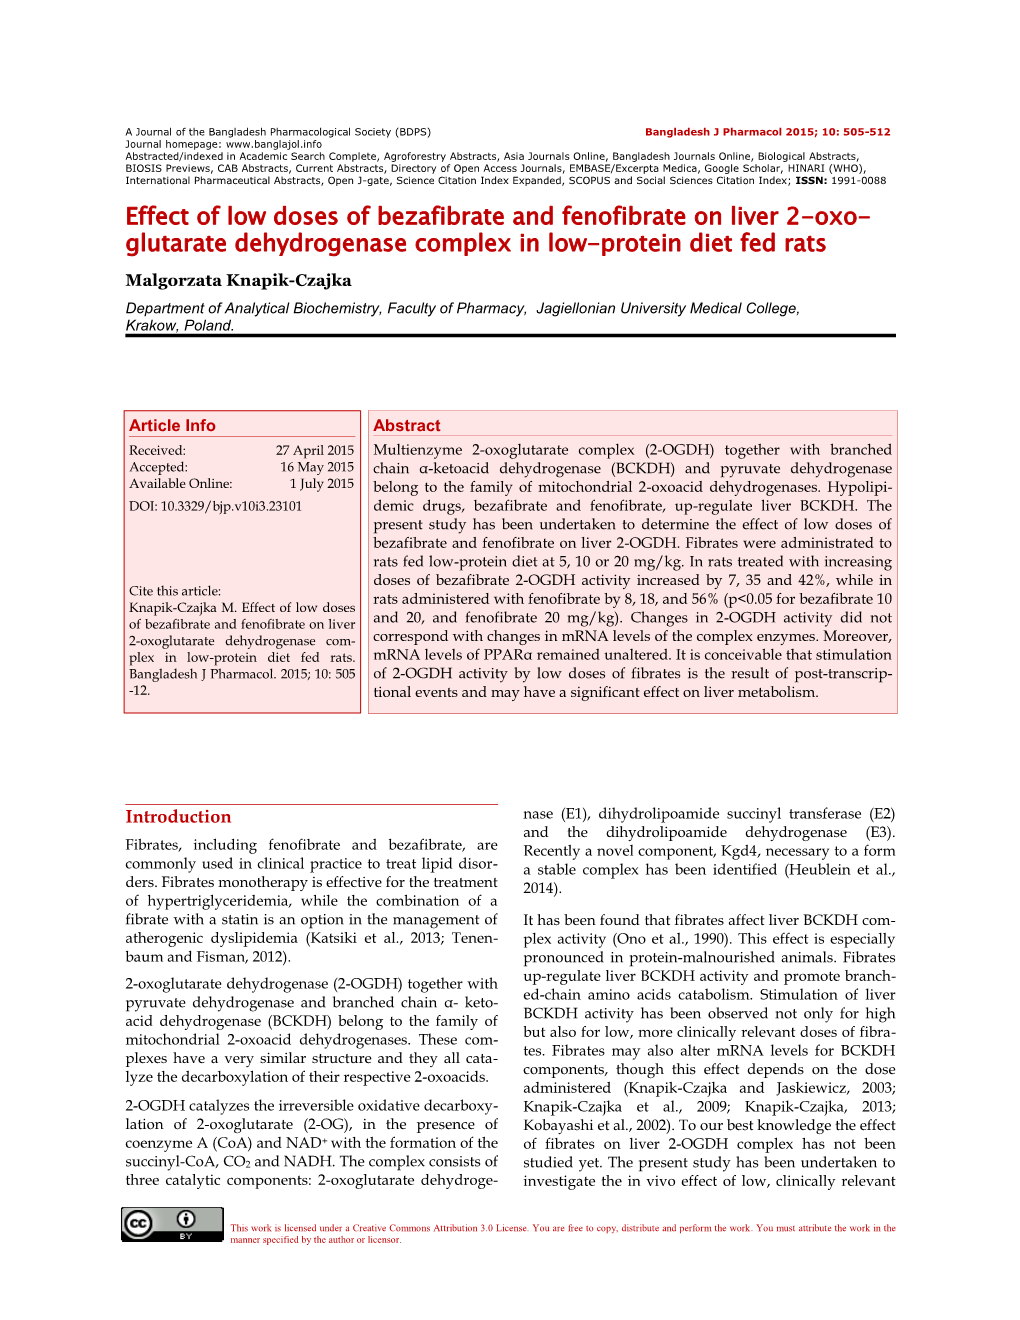 Effect of Low Doses of Bezafibrate and Fenofibrate on Liver 2-Oxoglutarate